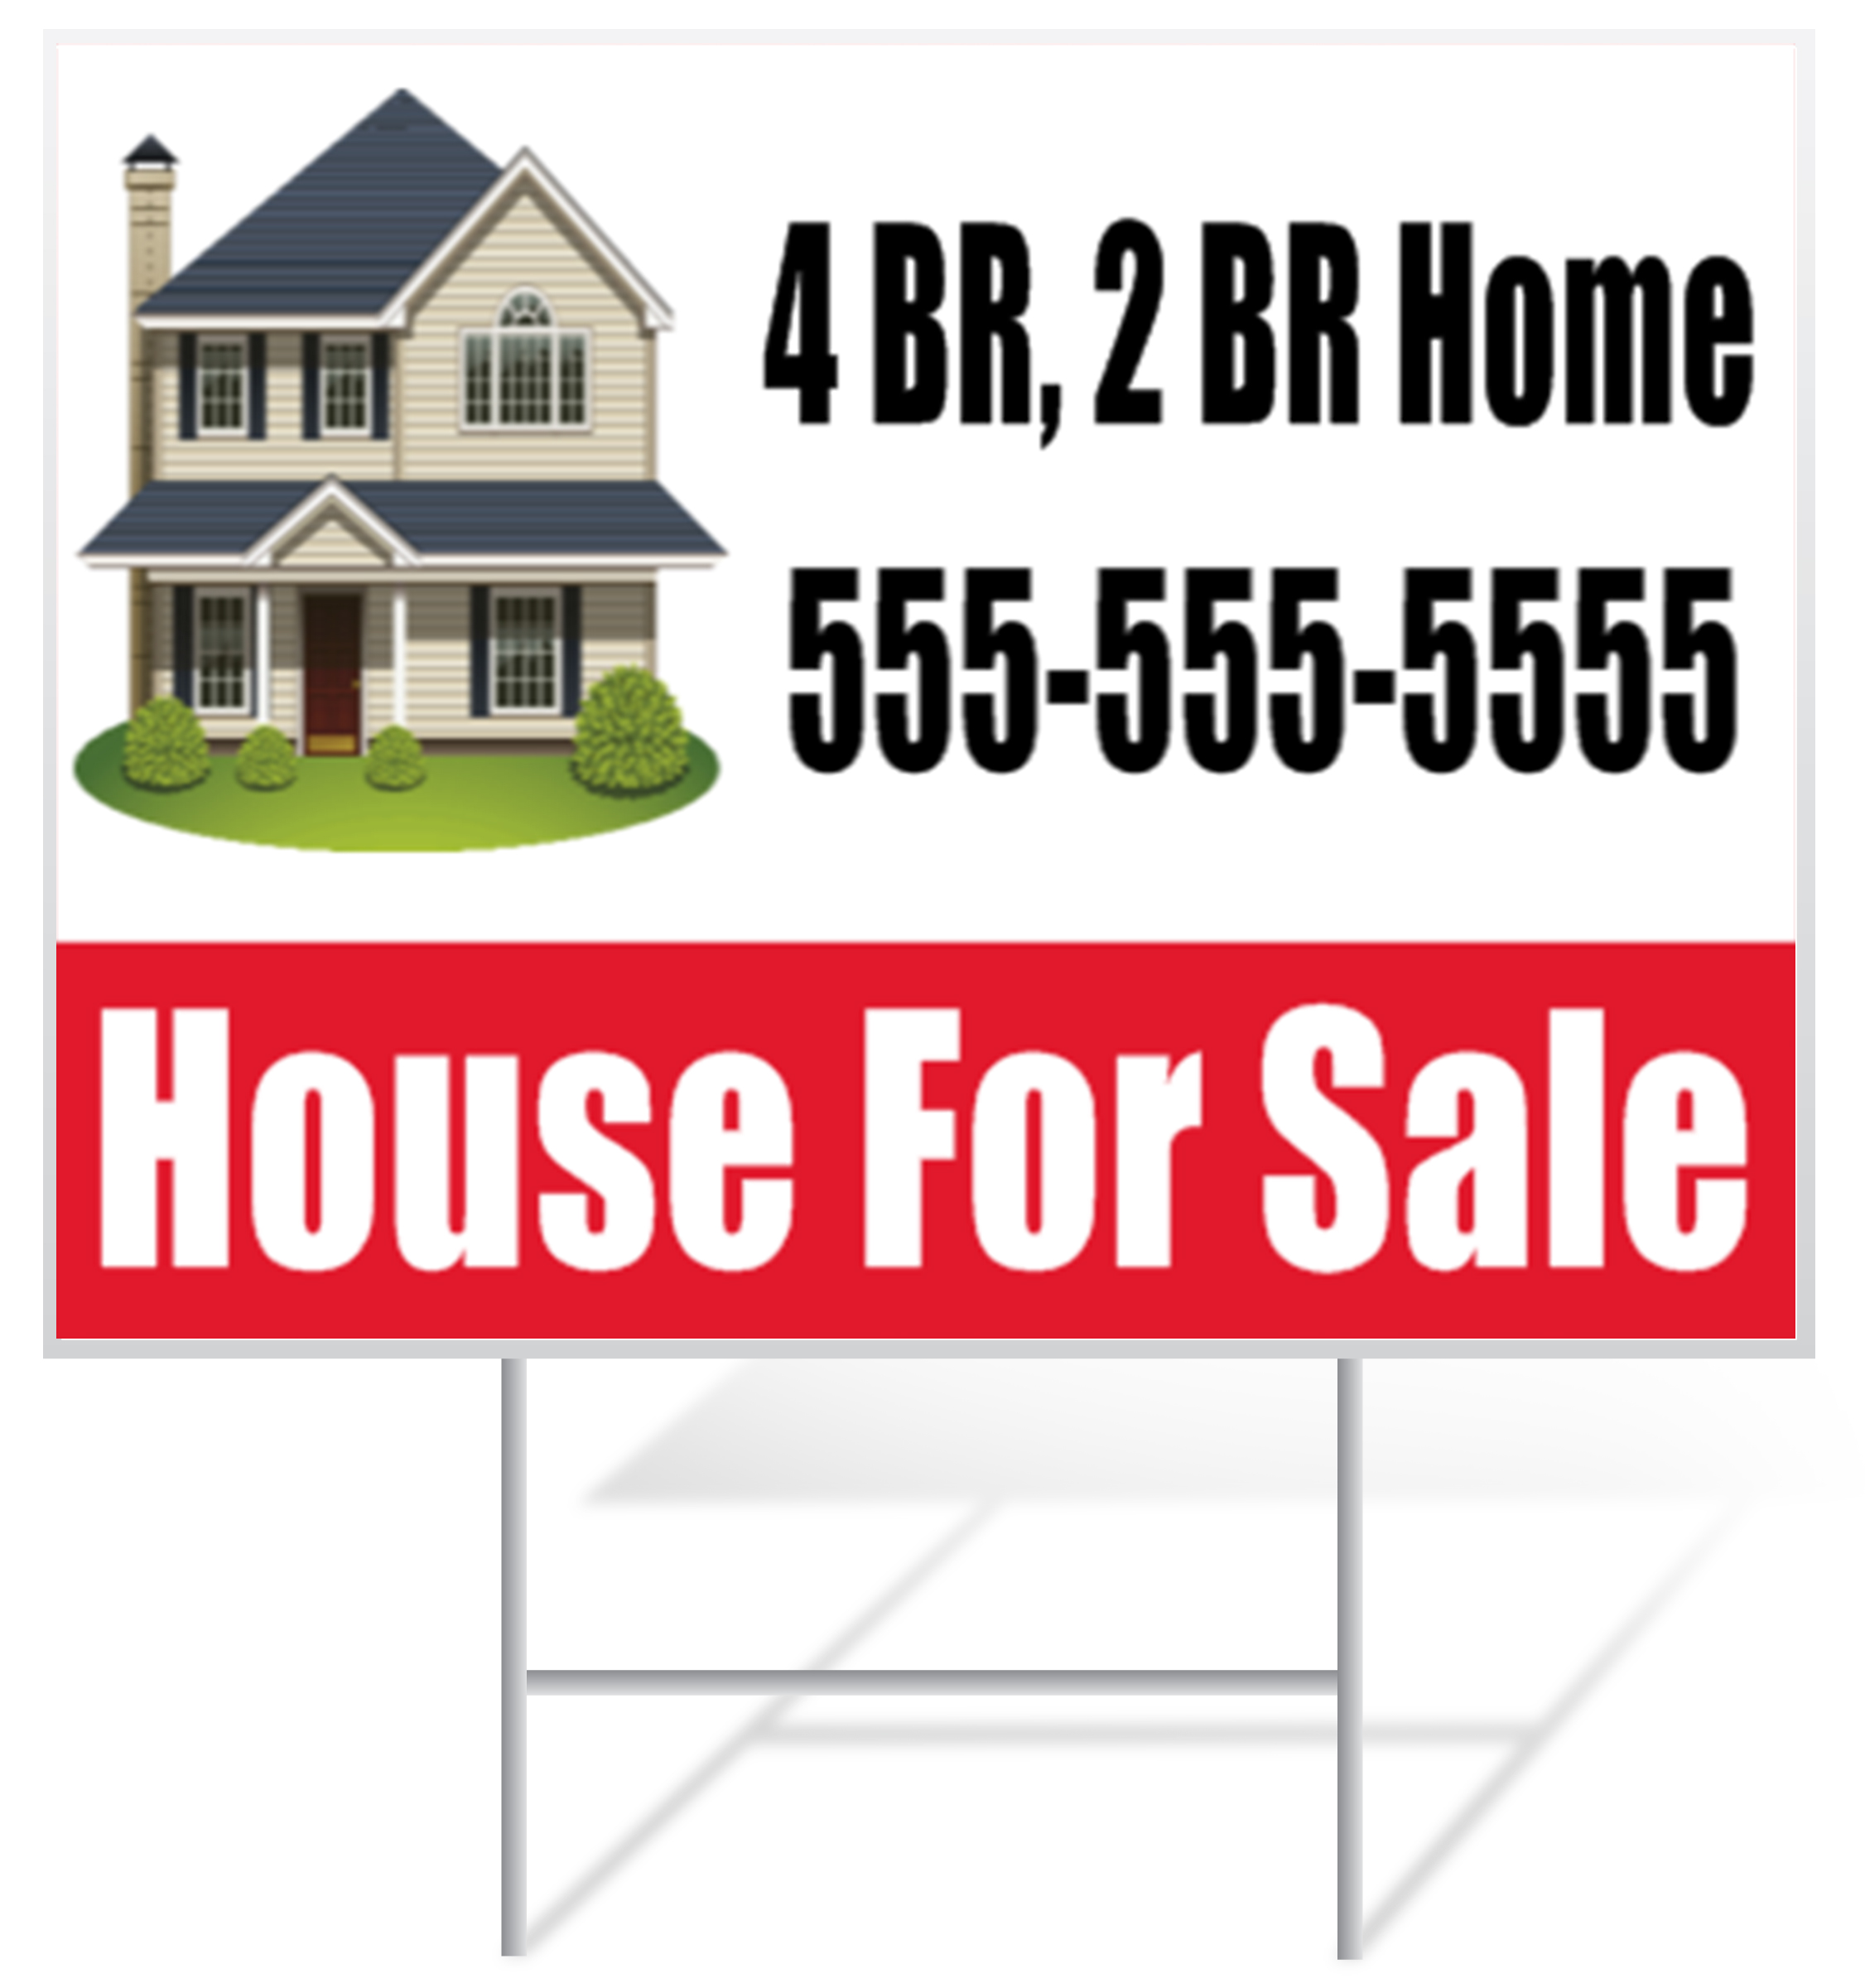 For Sale Lawn Sign Example | LawnSigns.com